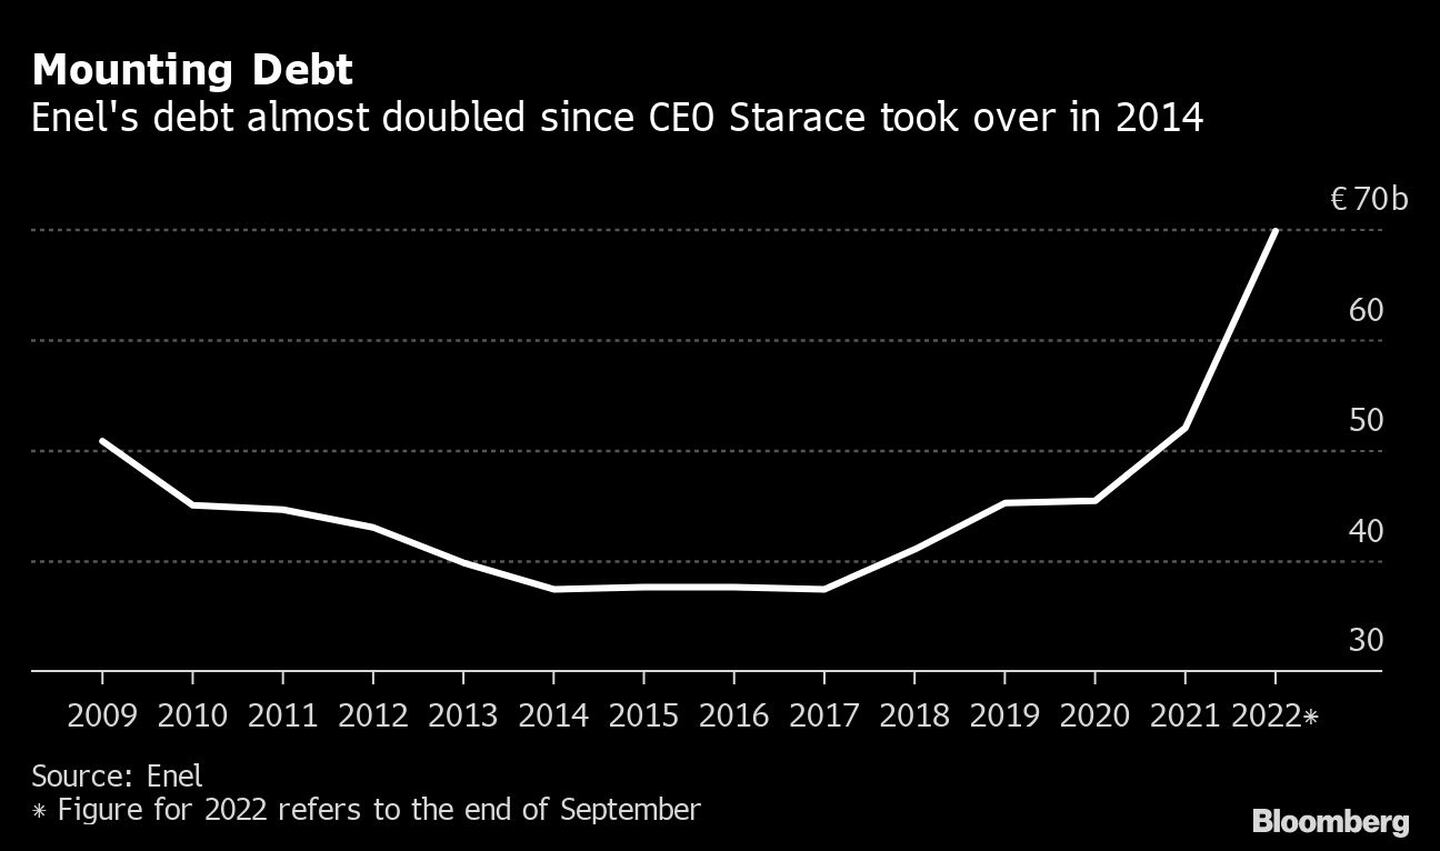 Mounting Debt | Enel's debt almost doubled since CEO Starace took over in 2014dfd